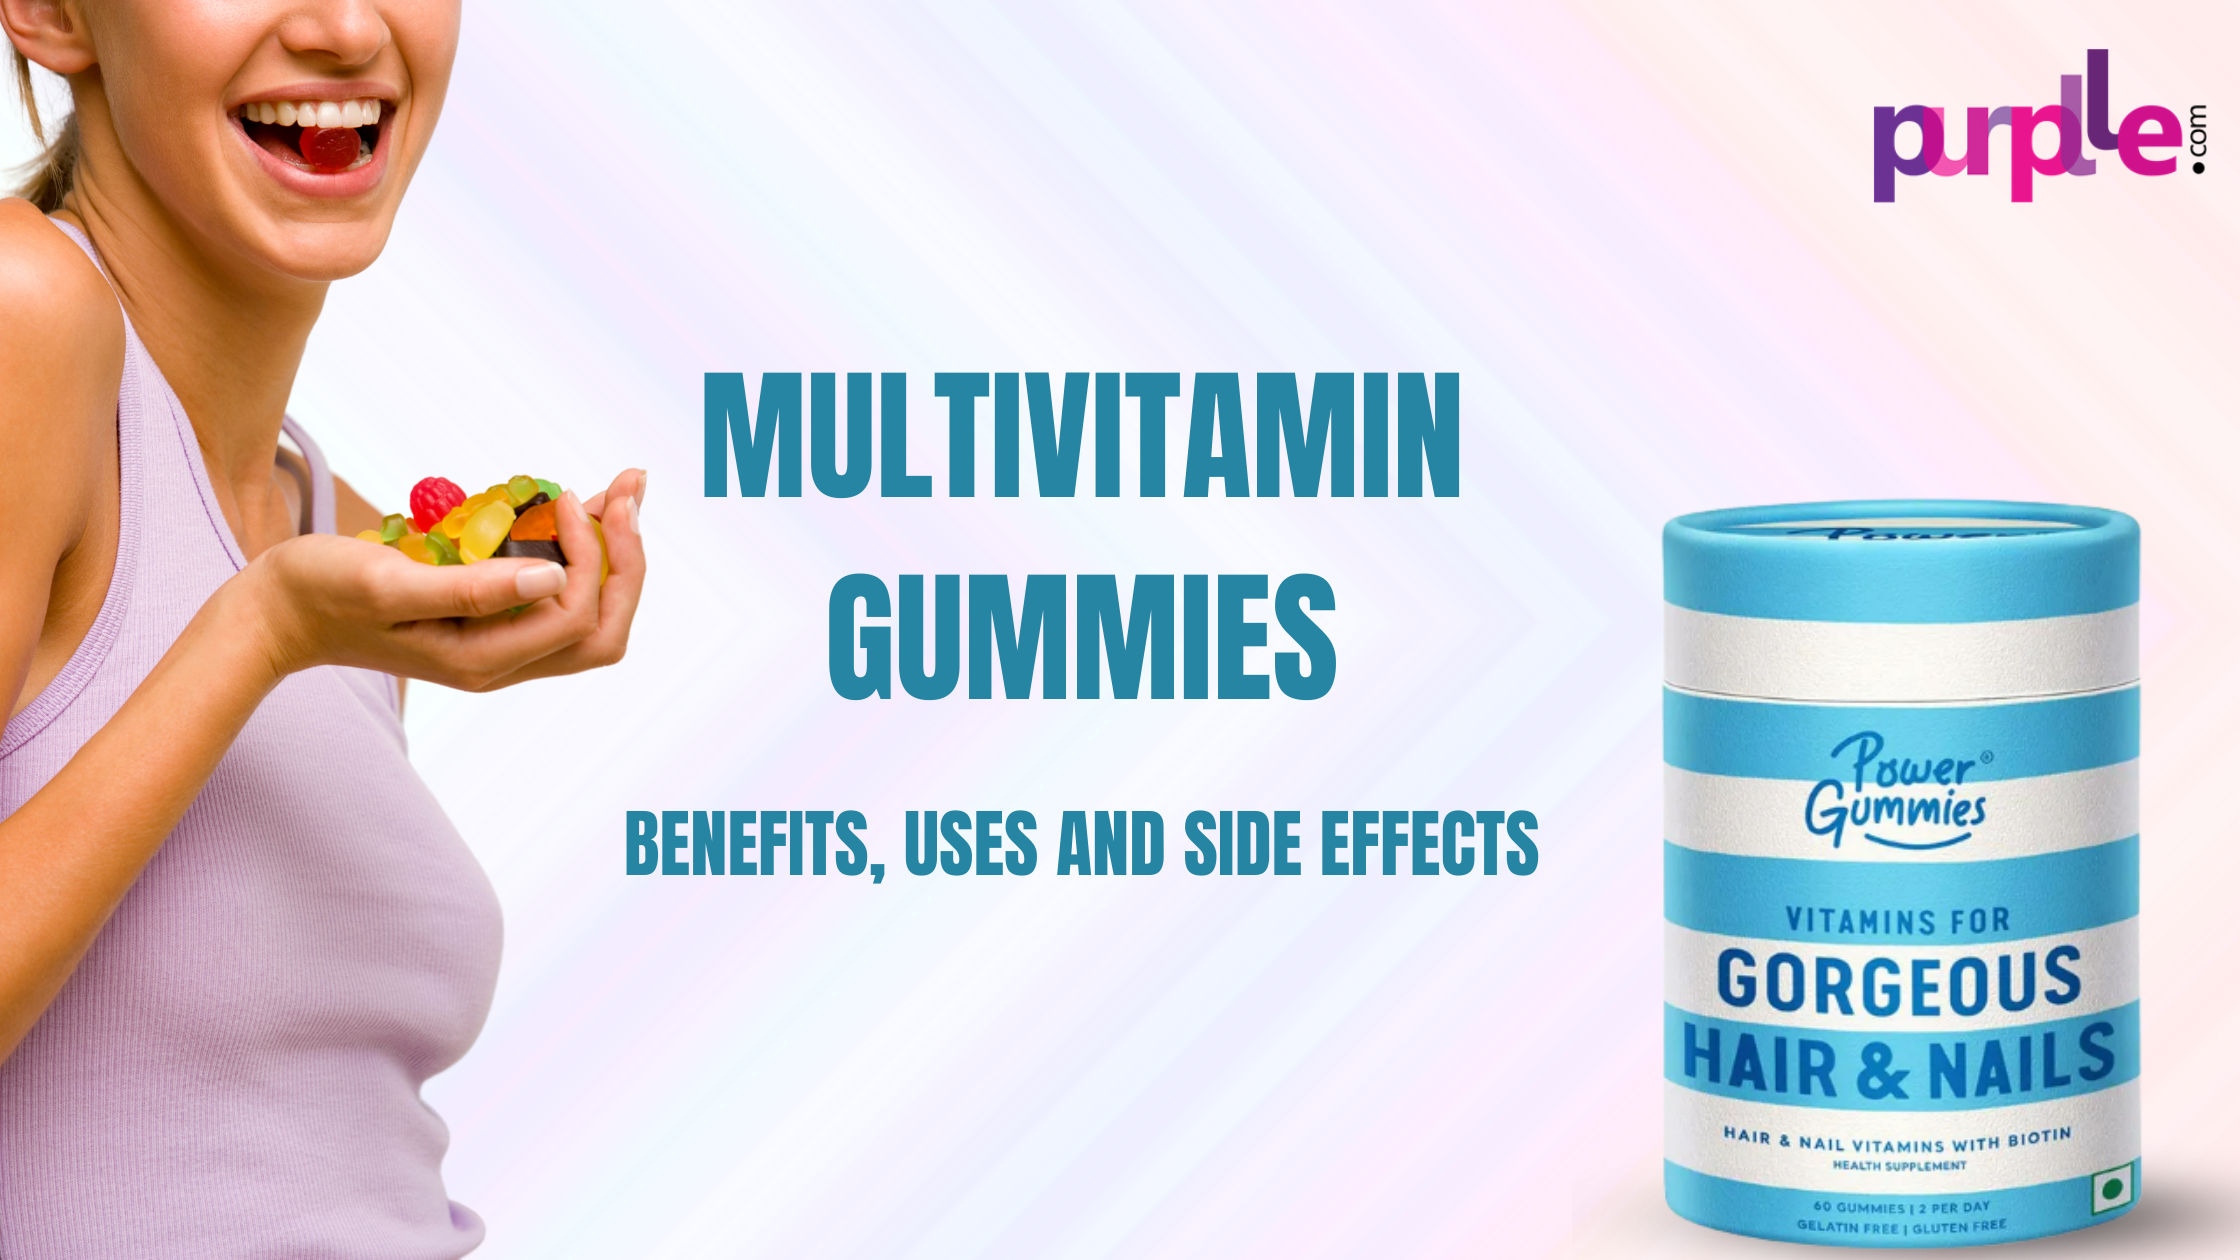 Power Gummies Combo Pack of Vitamins for Gorgeous Hair  Nails 60 Each   Gummies for Blessful Sleep 10 Each Buy combo pack of 2 boxes at best  price in India  1mg